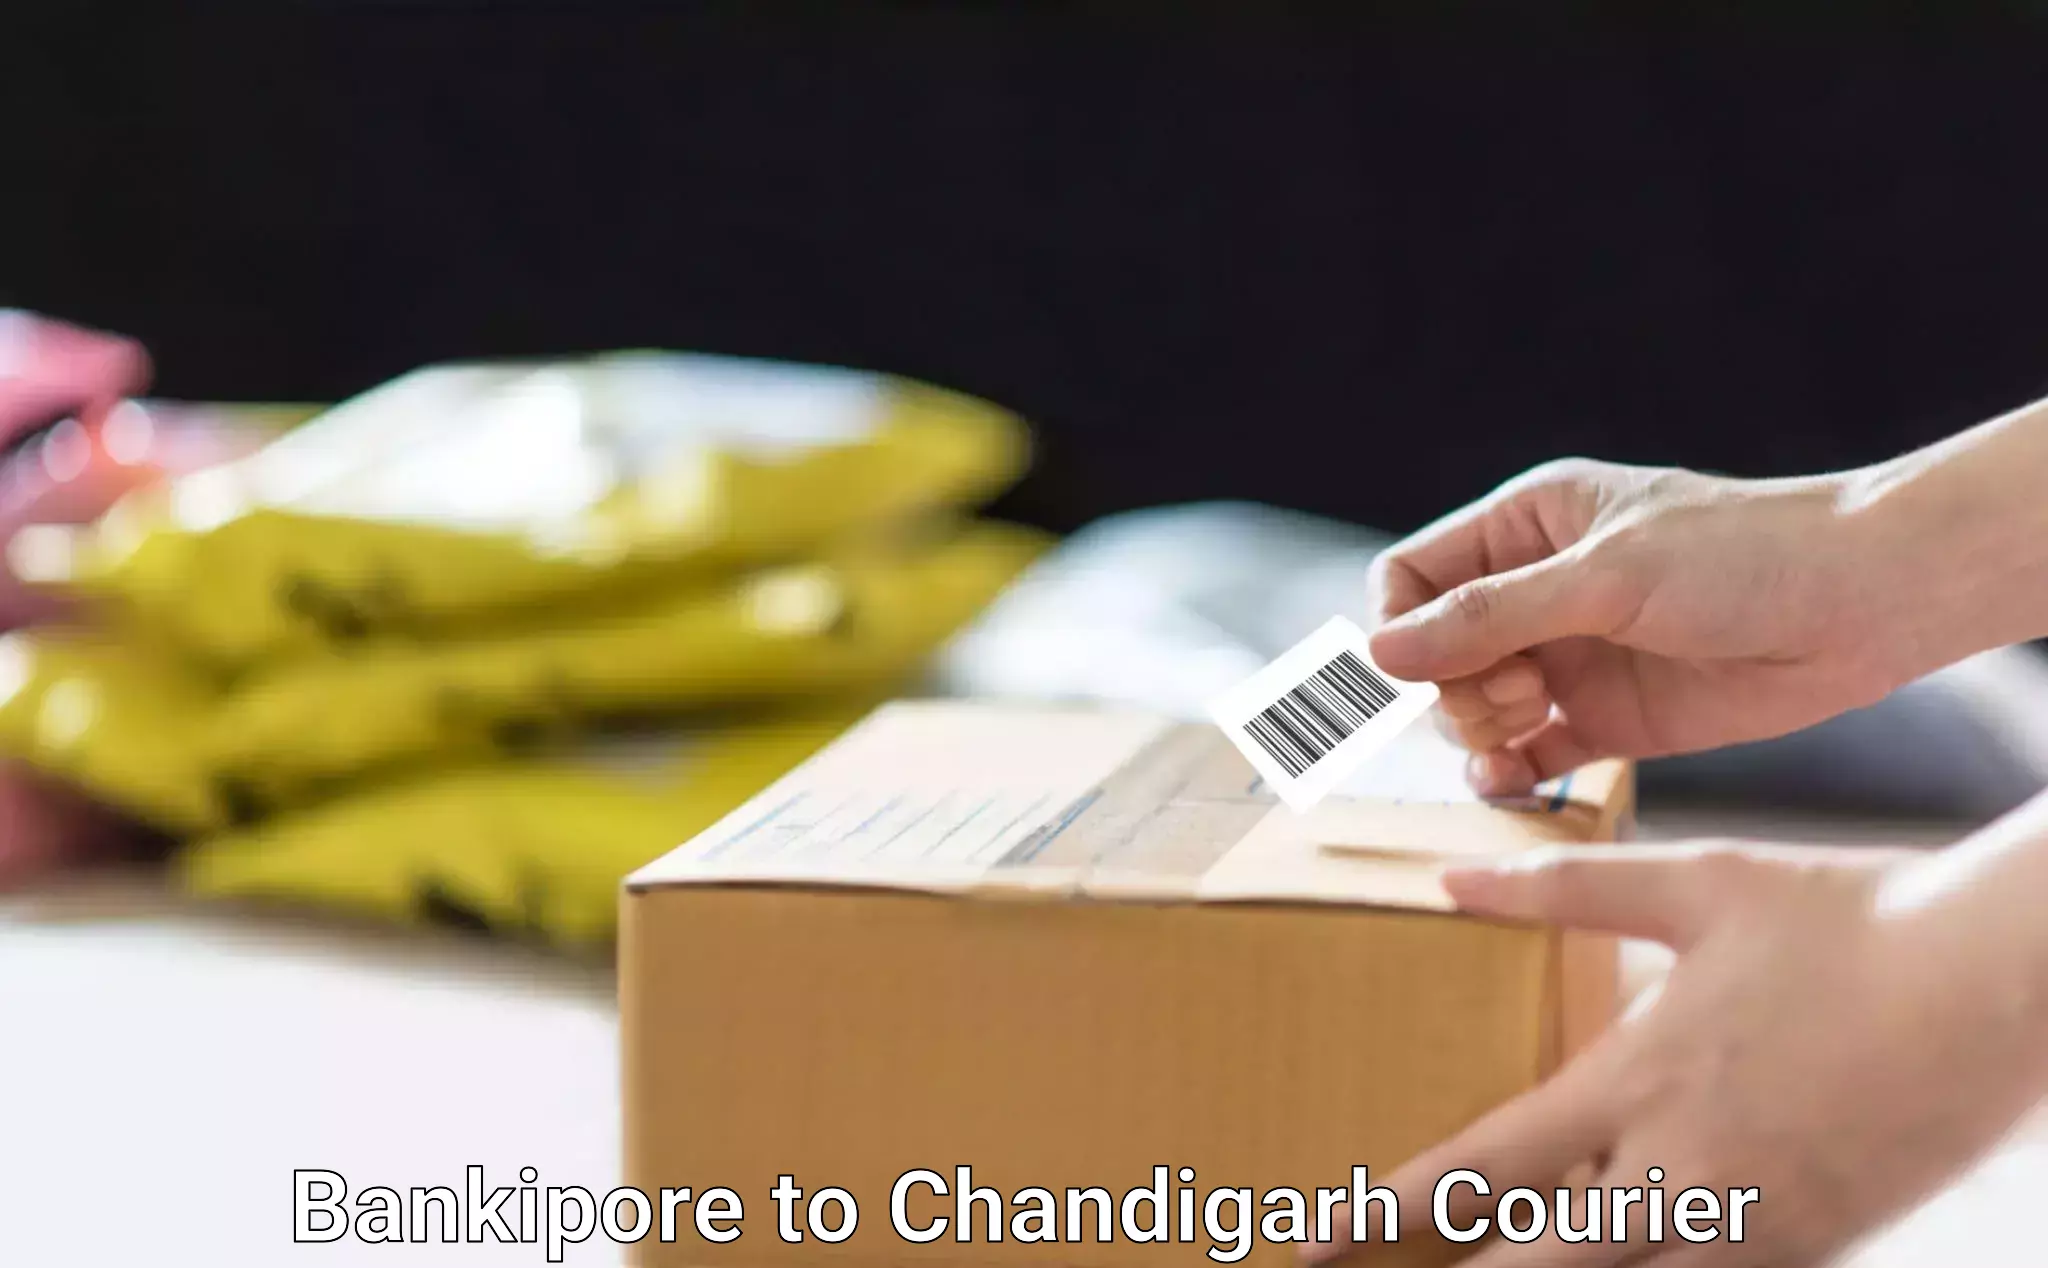 Furniture moving plans Bankipore to Chandigarh